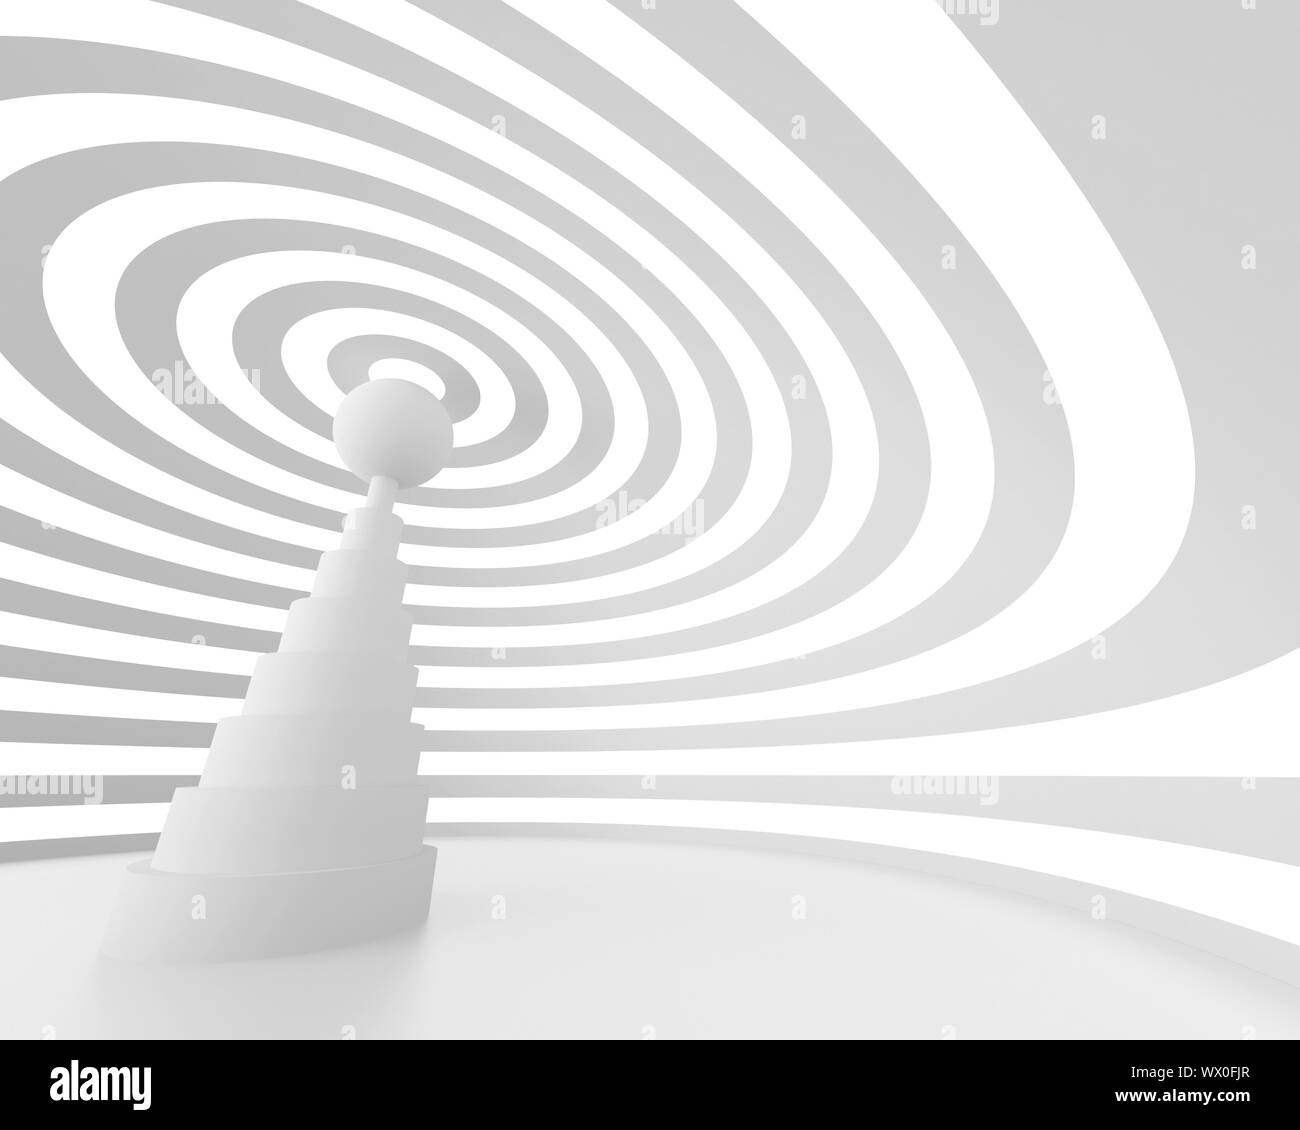 3d Illustration of White Wireless Background or Wallpaper Stock Photo